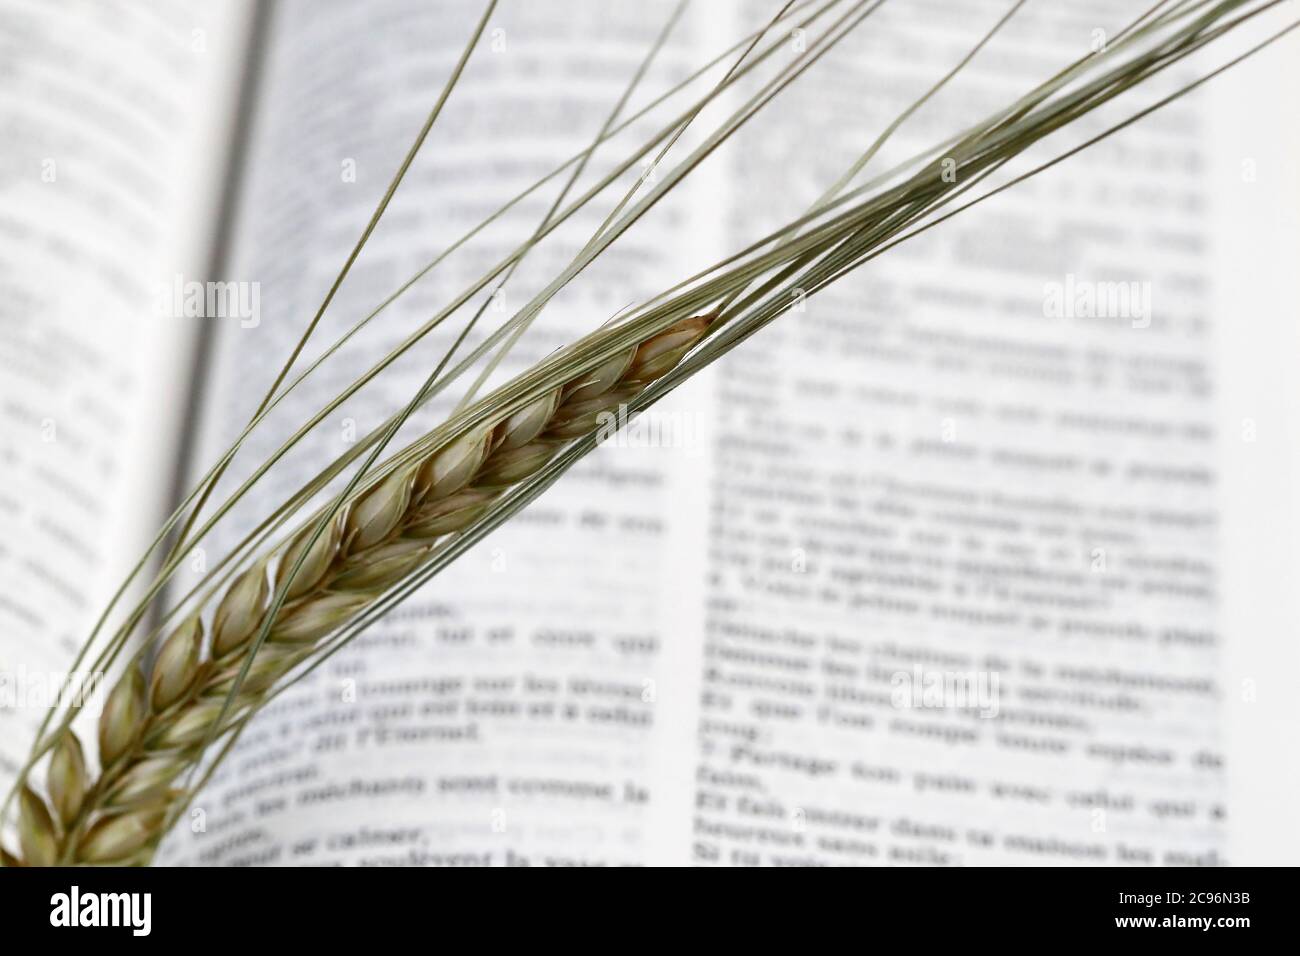 The sacred book of the Bible and ear of wheat as a symbol of spiritual and physical food.  France. Stock Photo